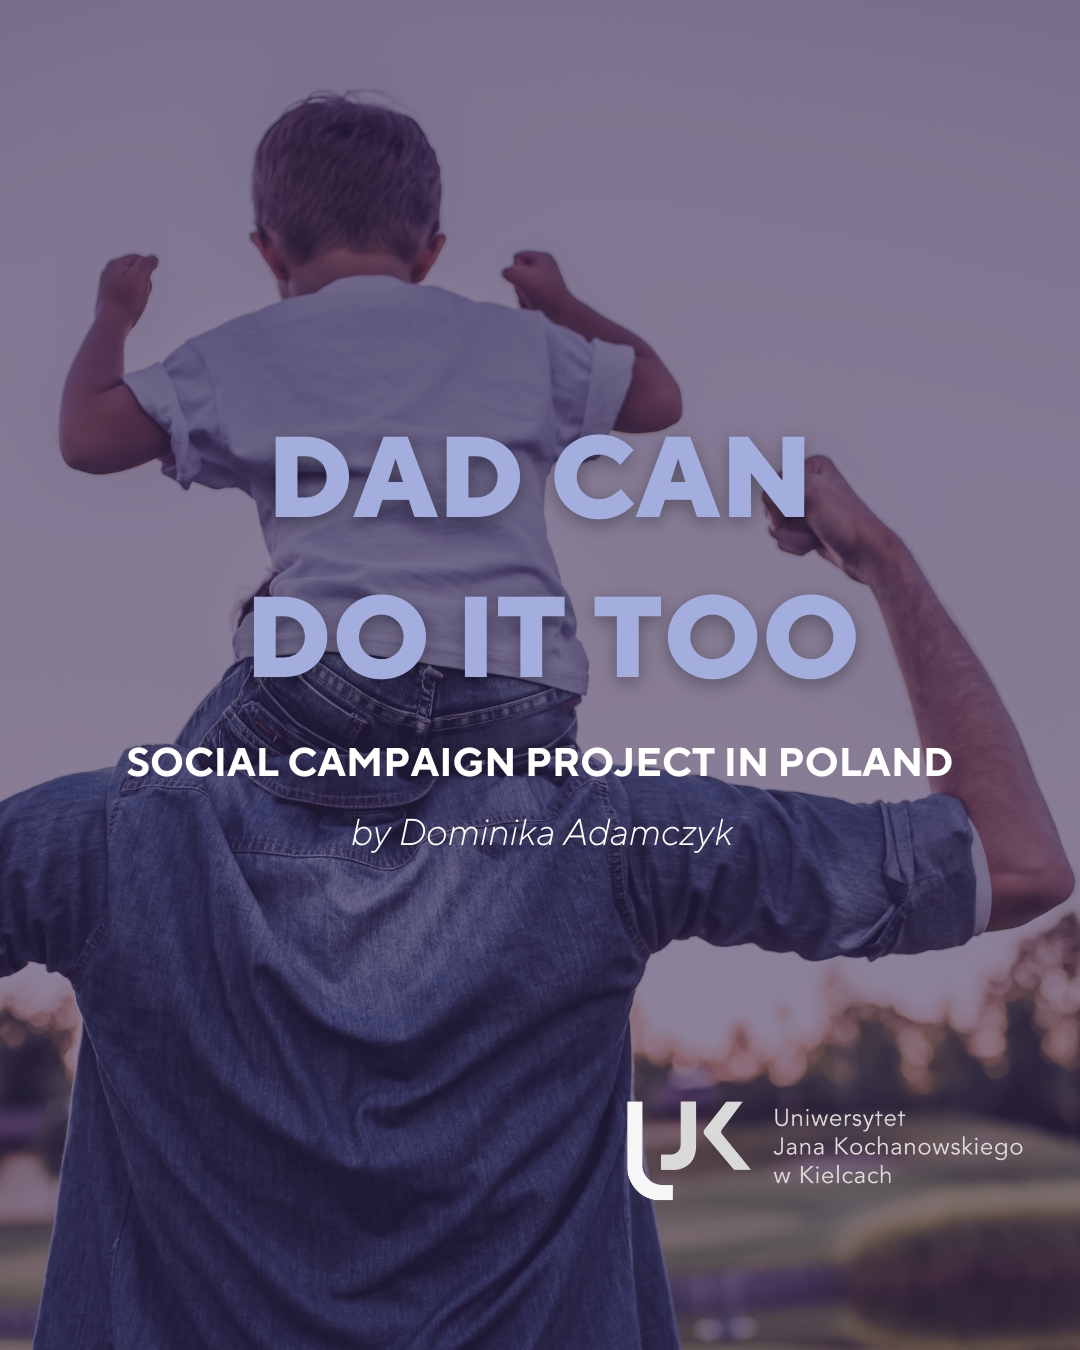 “Dad Can Do It Too” Campaign promotes active fatherhood